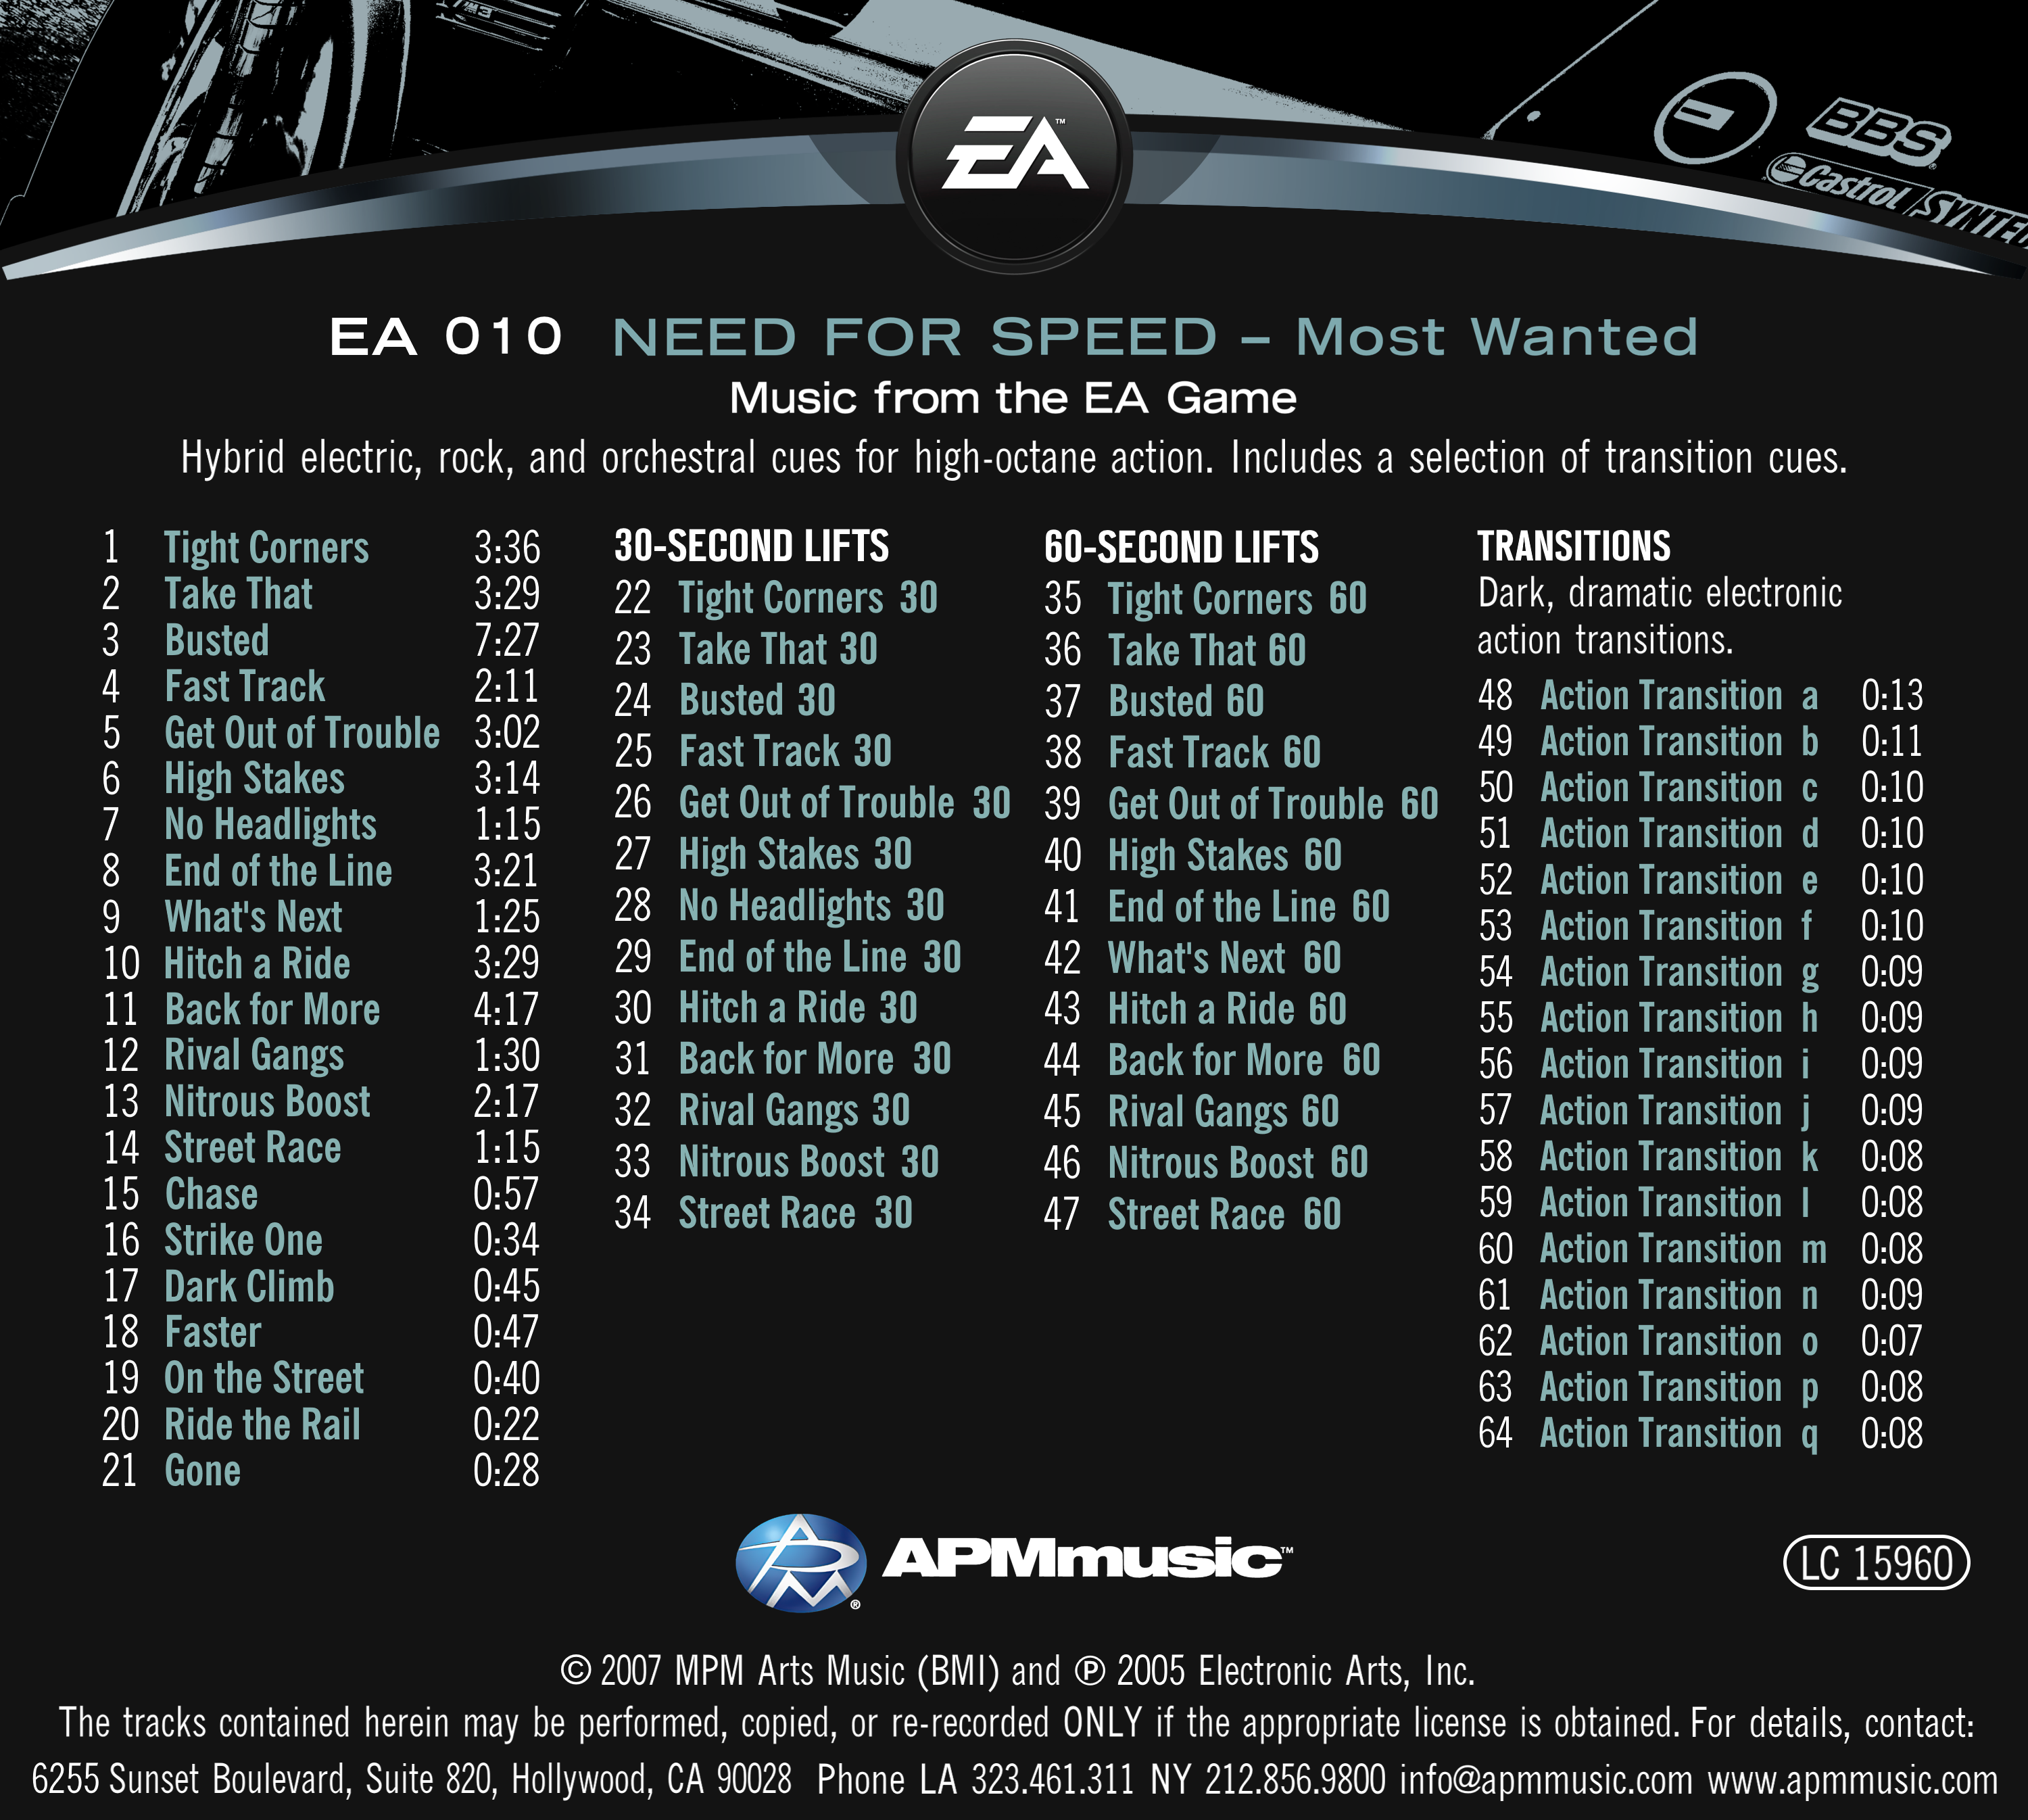 nfs most wanted soundtrack